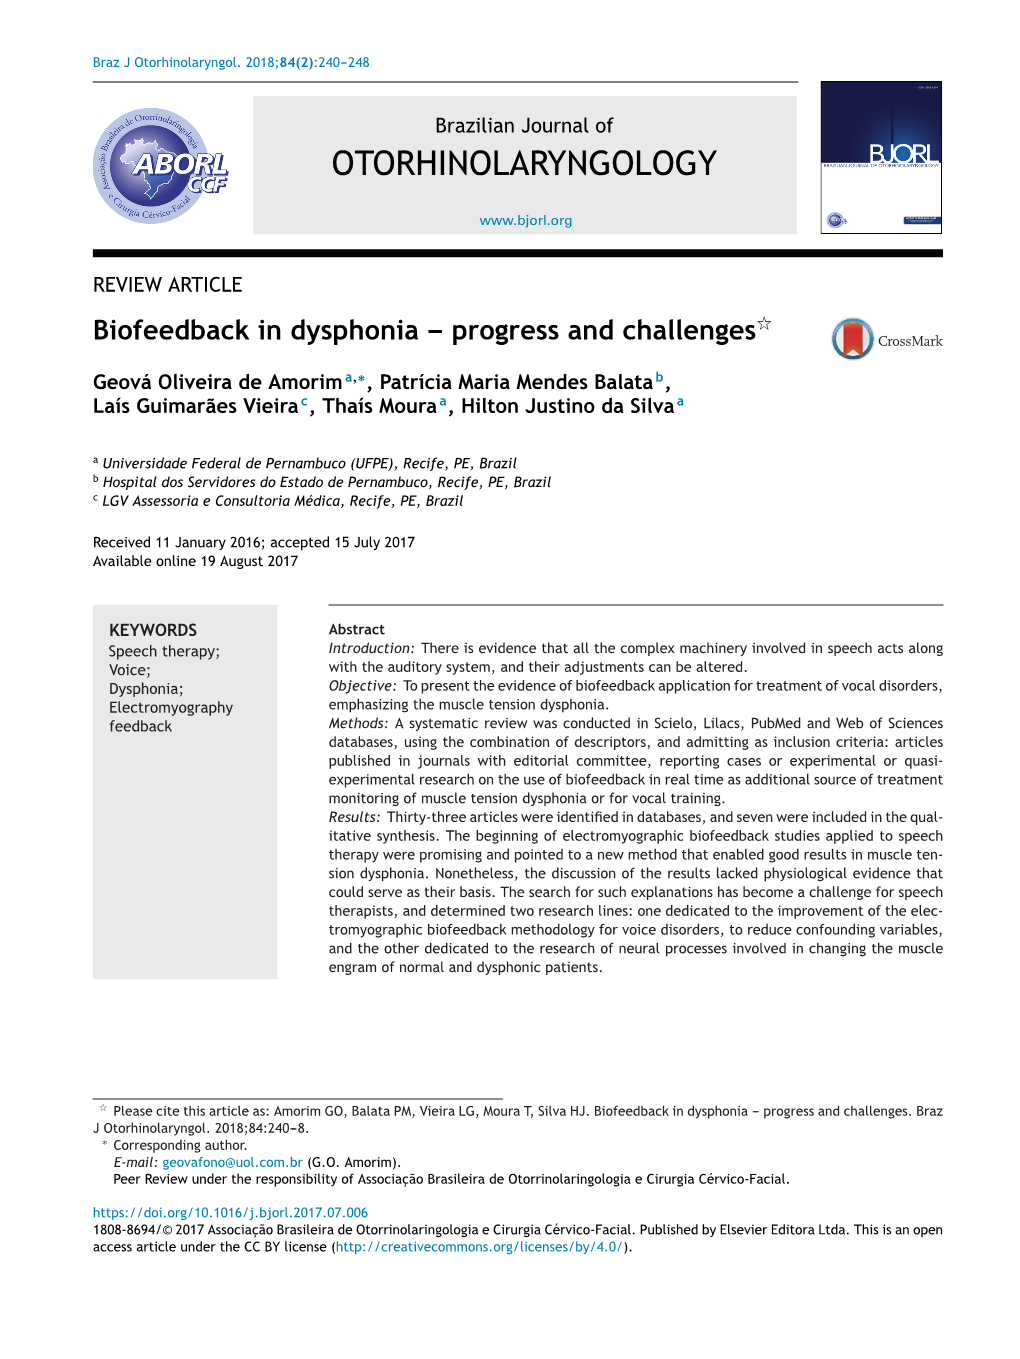 Biofeedback in Dysphonia – Progress and Challenges